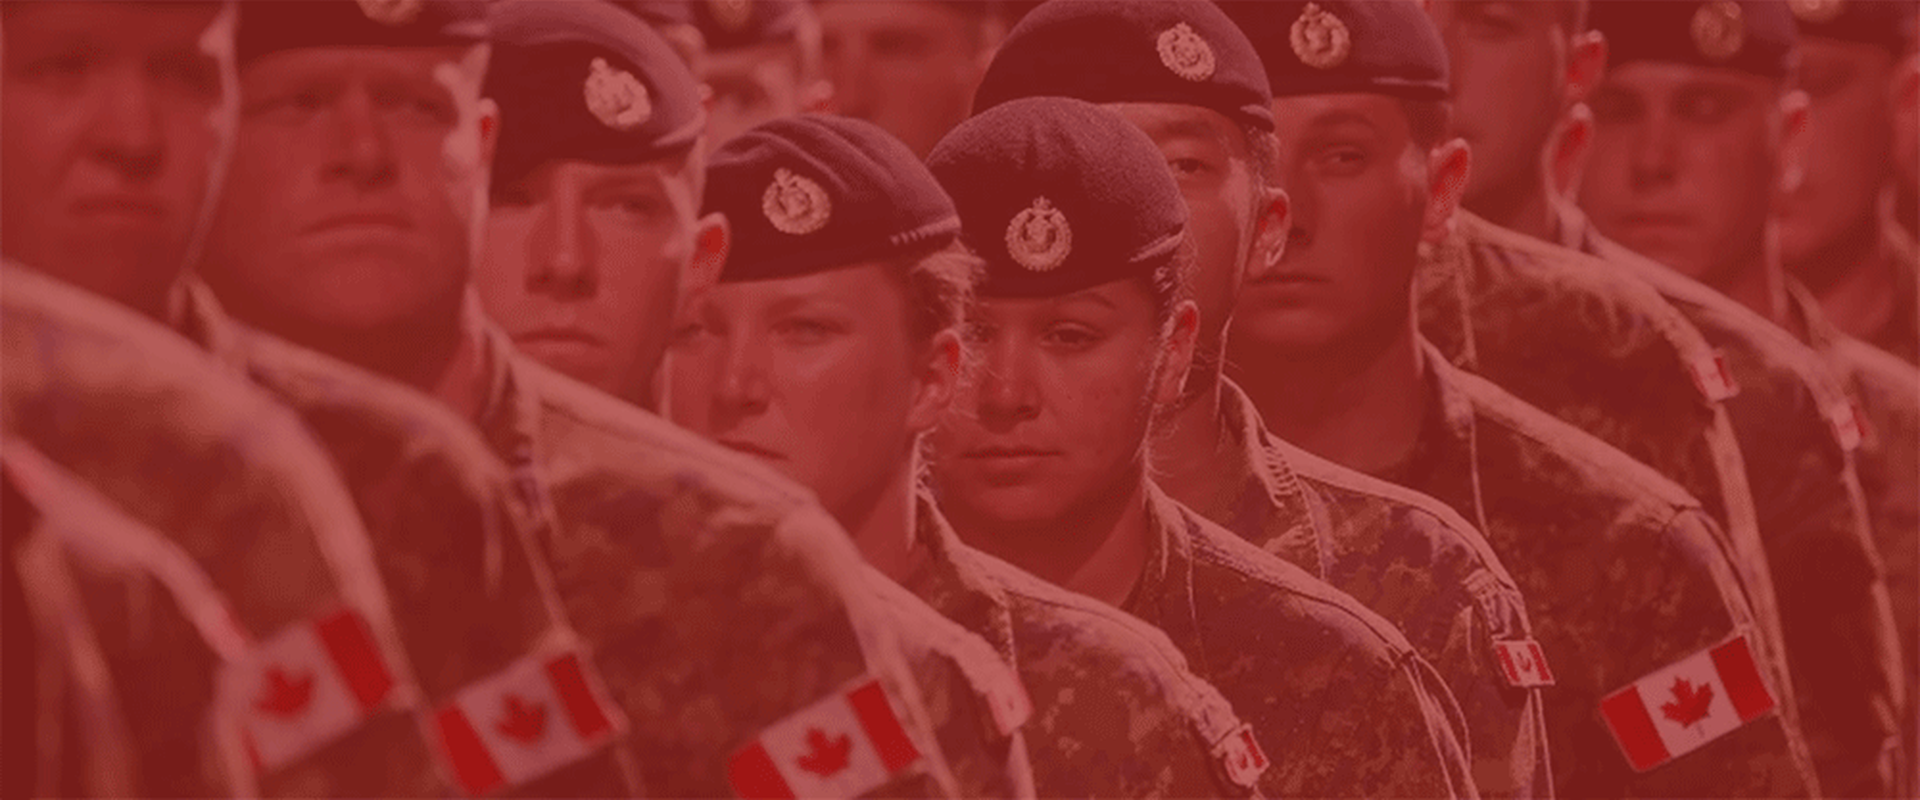 Canadian Soldiers - The Many Faces of Diversity in Military Employment